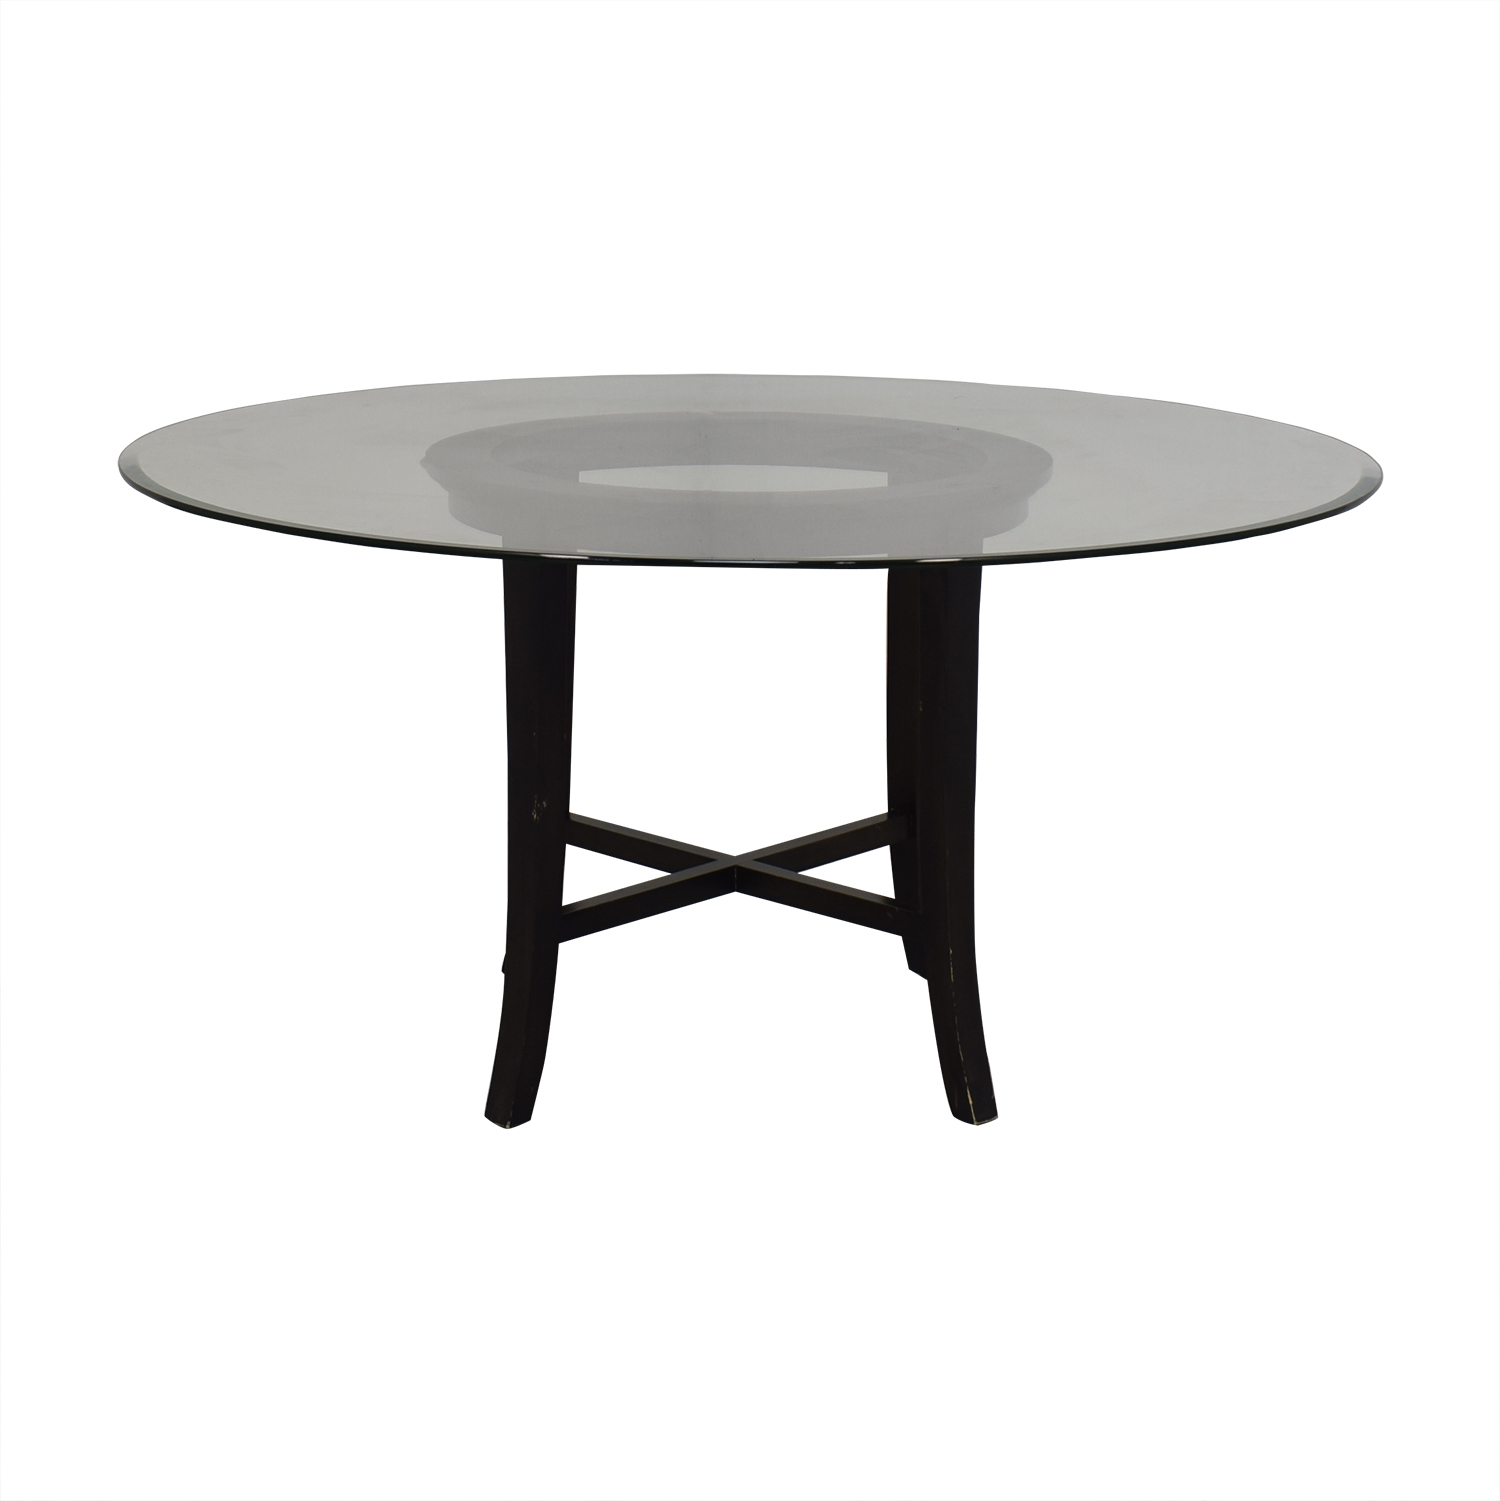 72 Off Crate Barrel Crate Barrel Halo Ebony Round Dining Table With Glass Top Tables within proportions 1500 X 1501